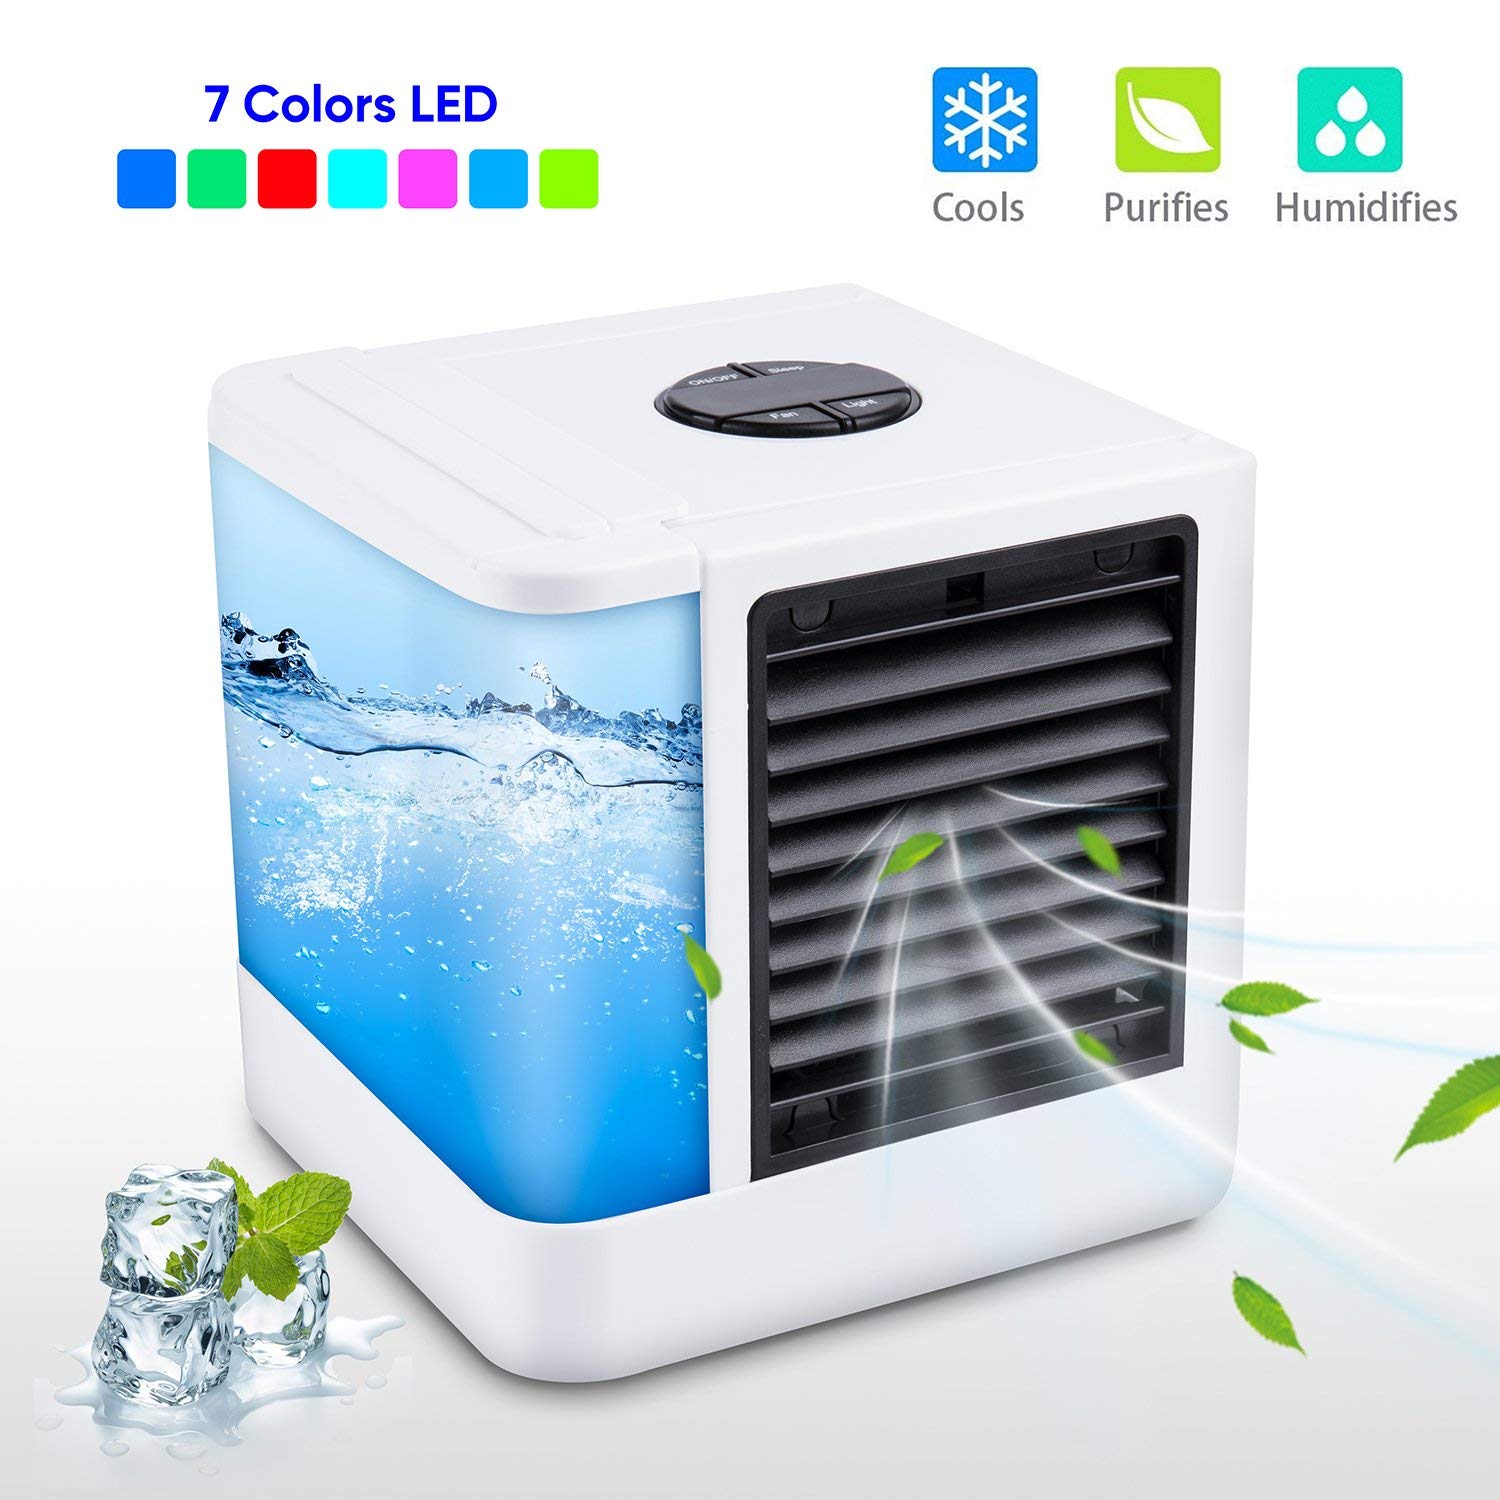 jeg er sulten metodologi Forholdsvis Mini USB Air Conditioner Humidifier Purifier 7 Colors Light Desktop  Portable Air Cooling Fan Air Cooler Fan aire acondicionado - Price history  & Review | AliExpress Seller - KitchenOne Store | Alitools.io